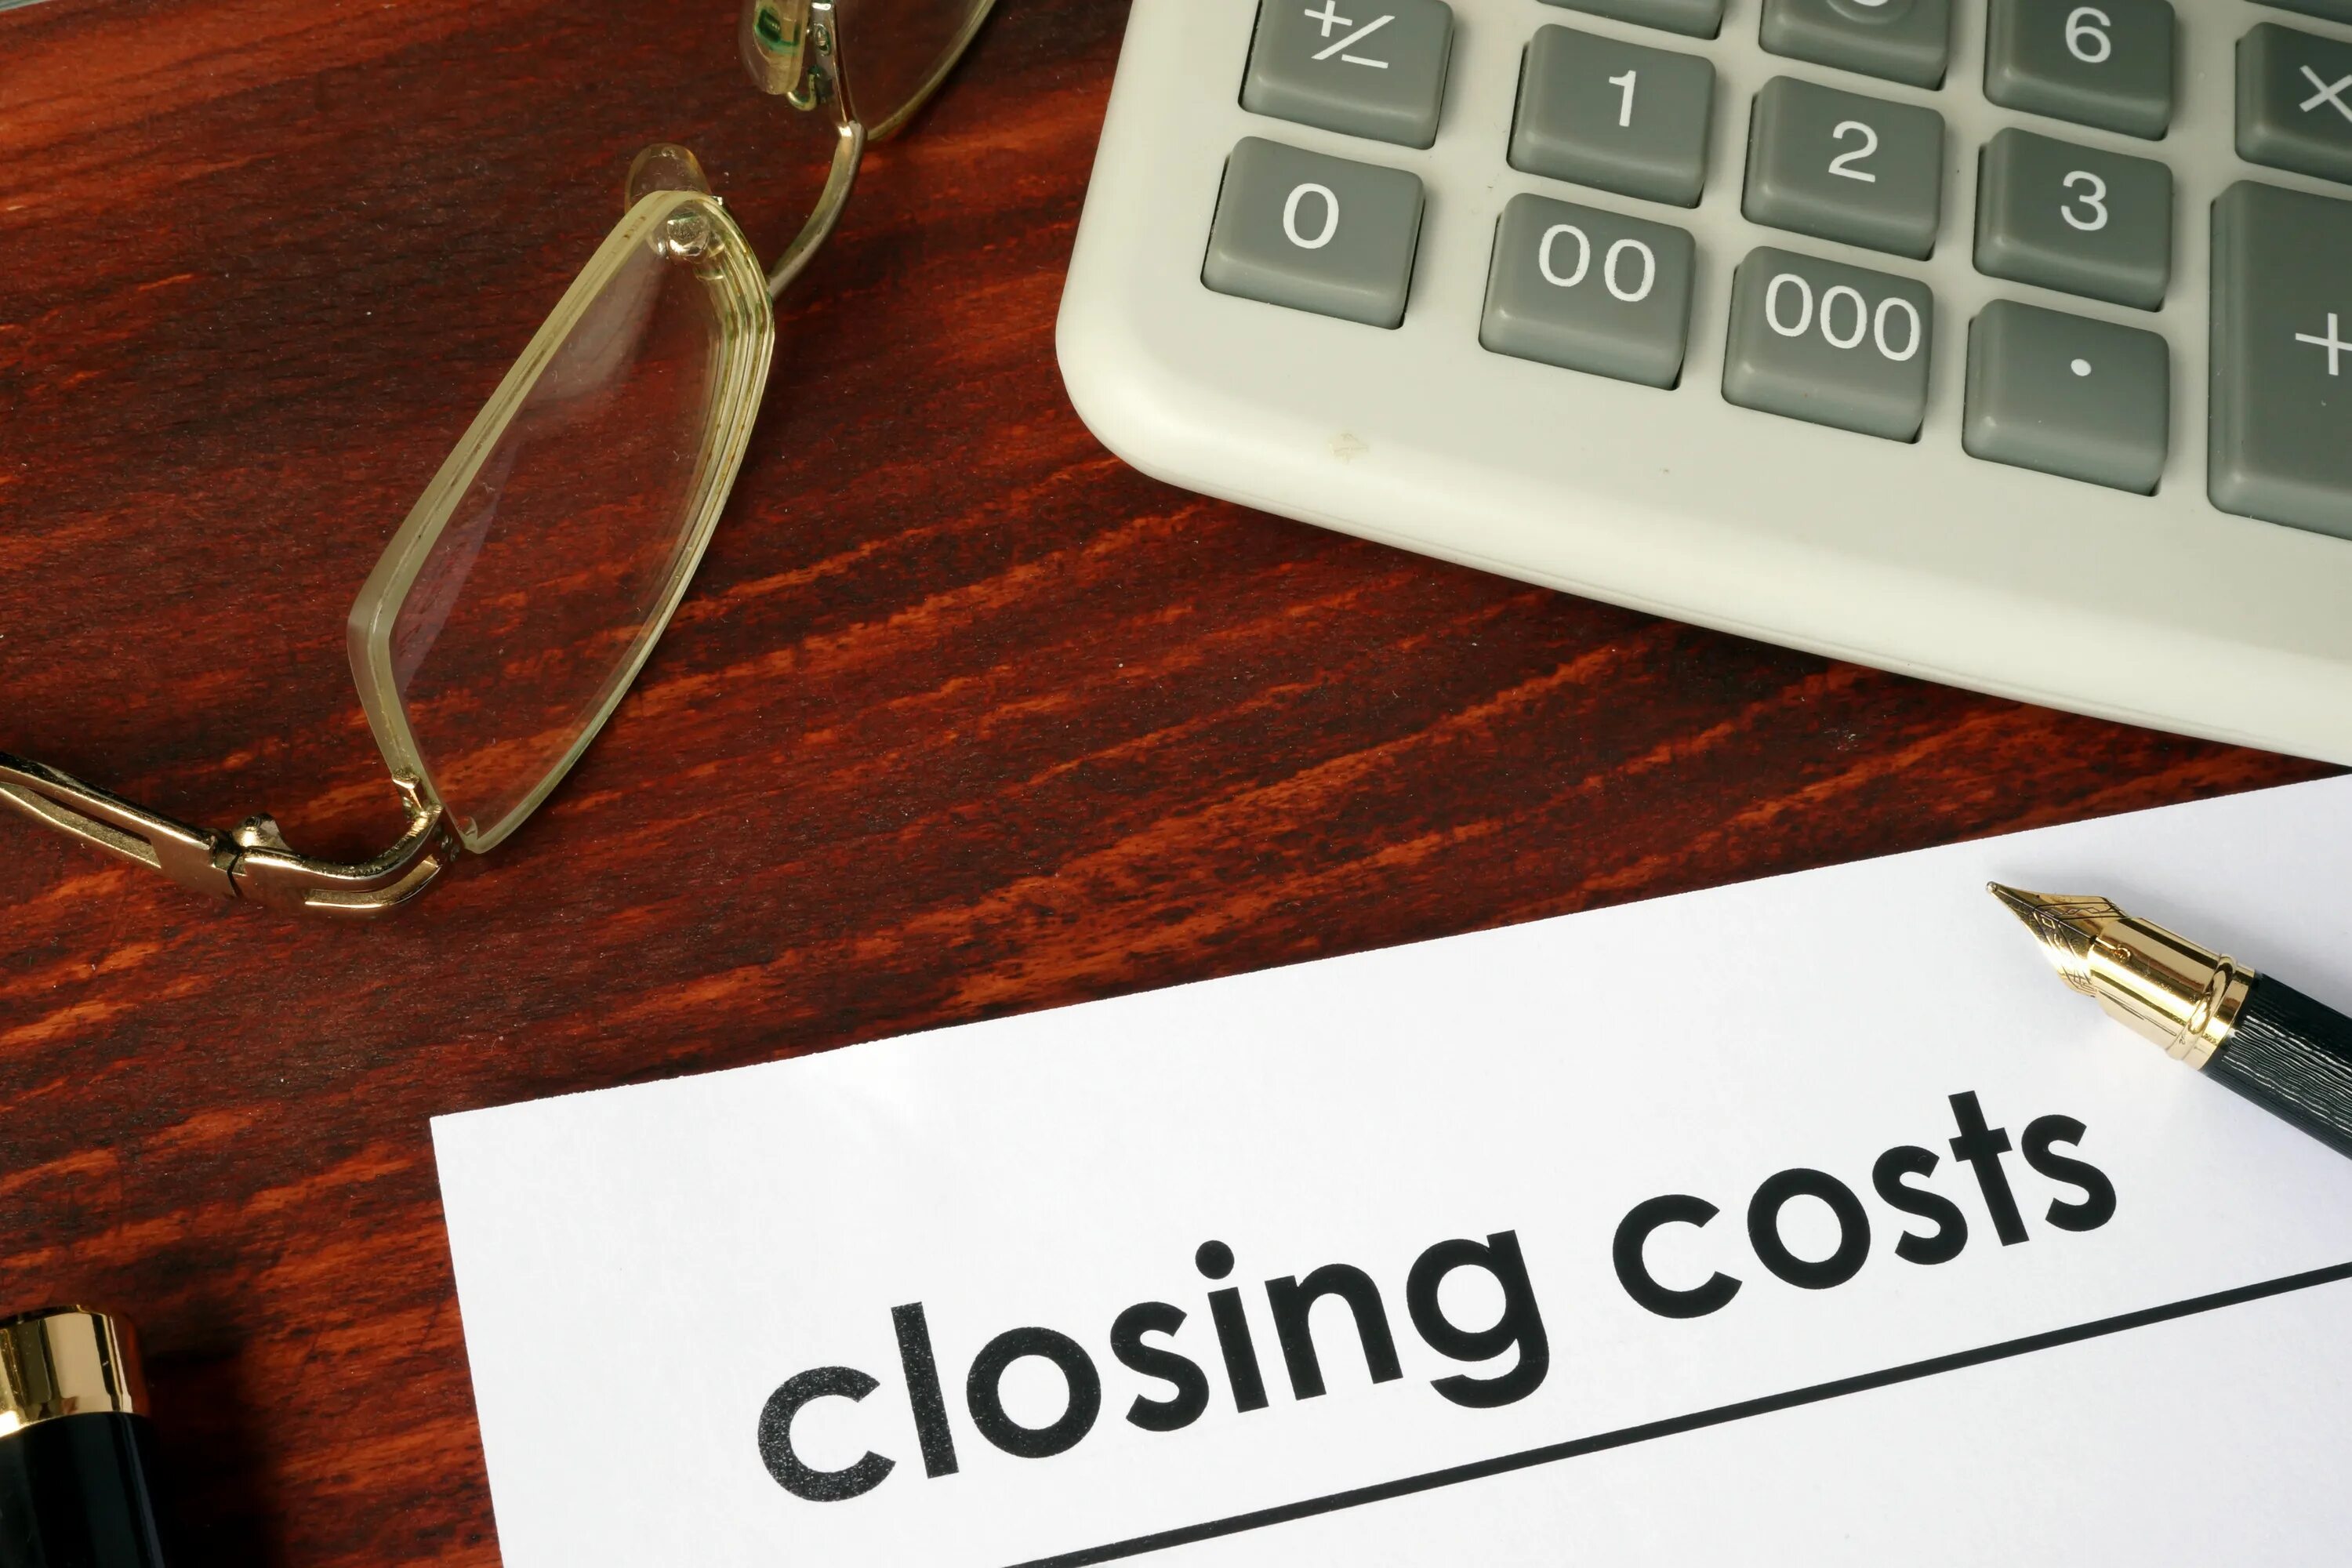 Closing. Costs. Ways to reduce closing costs.